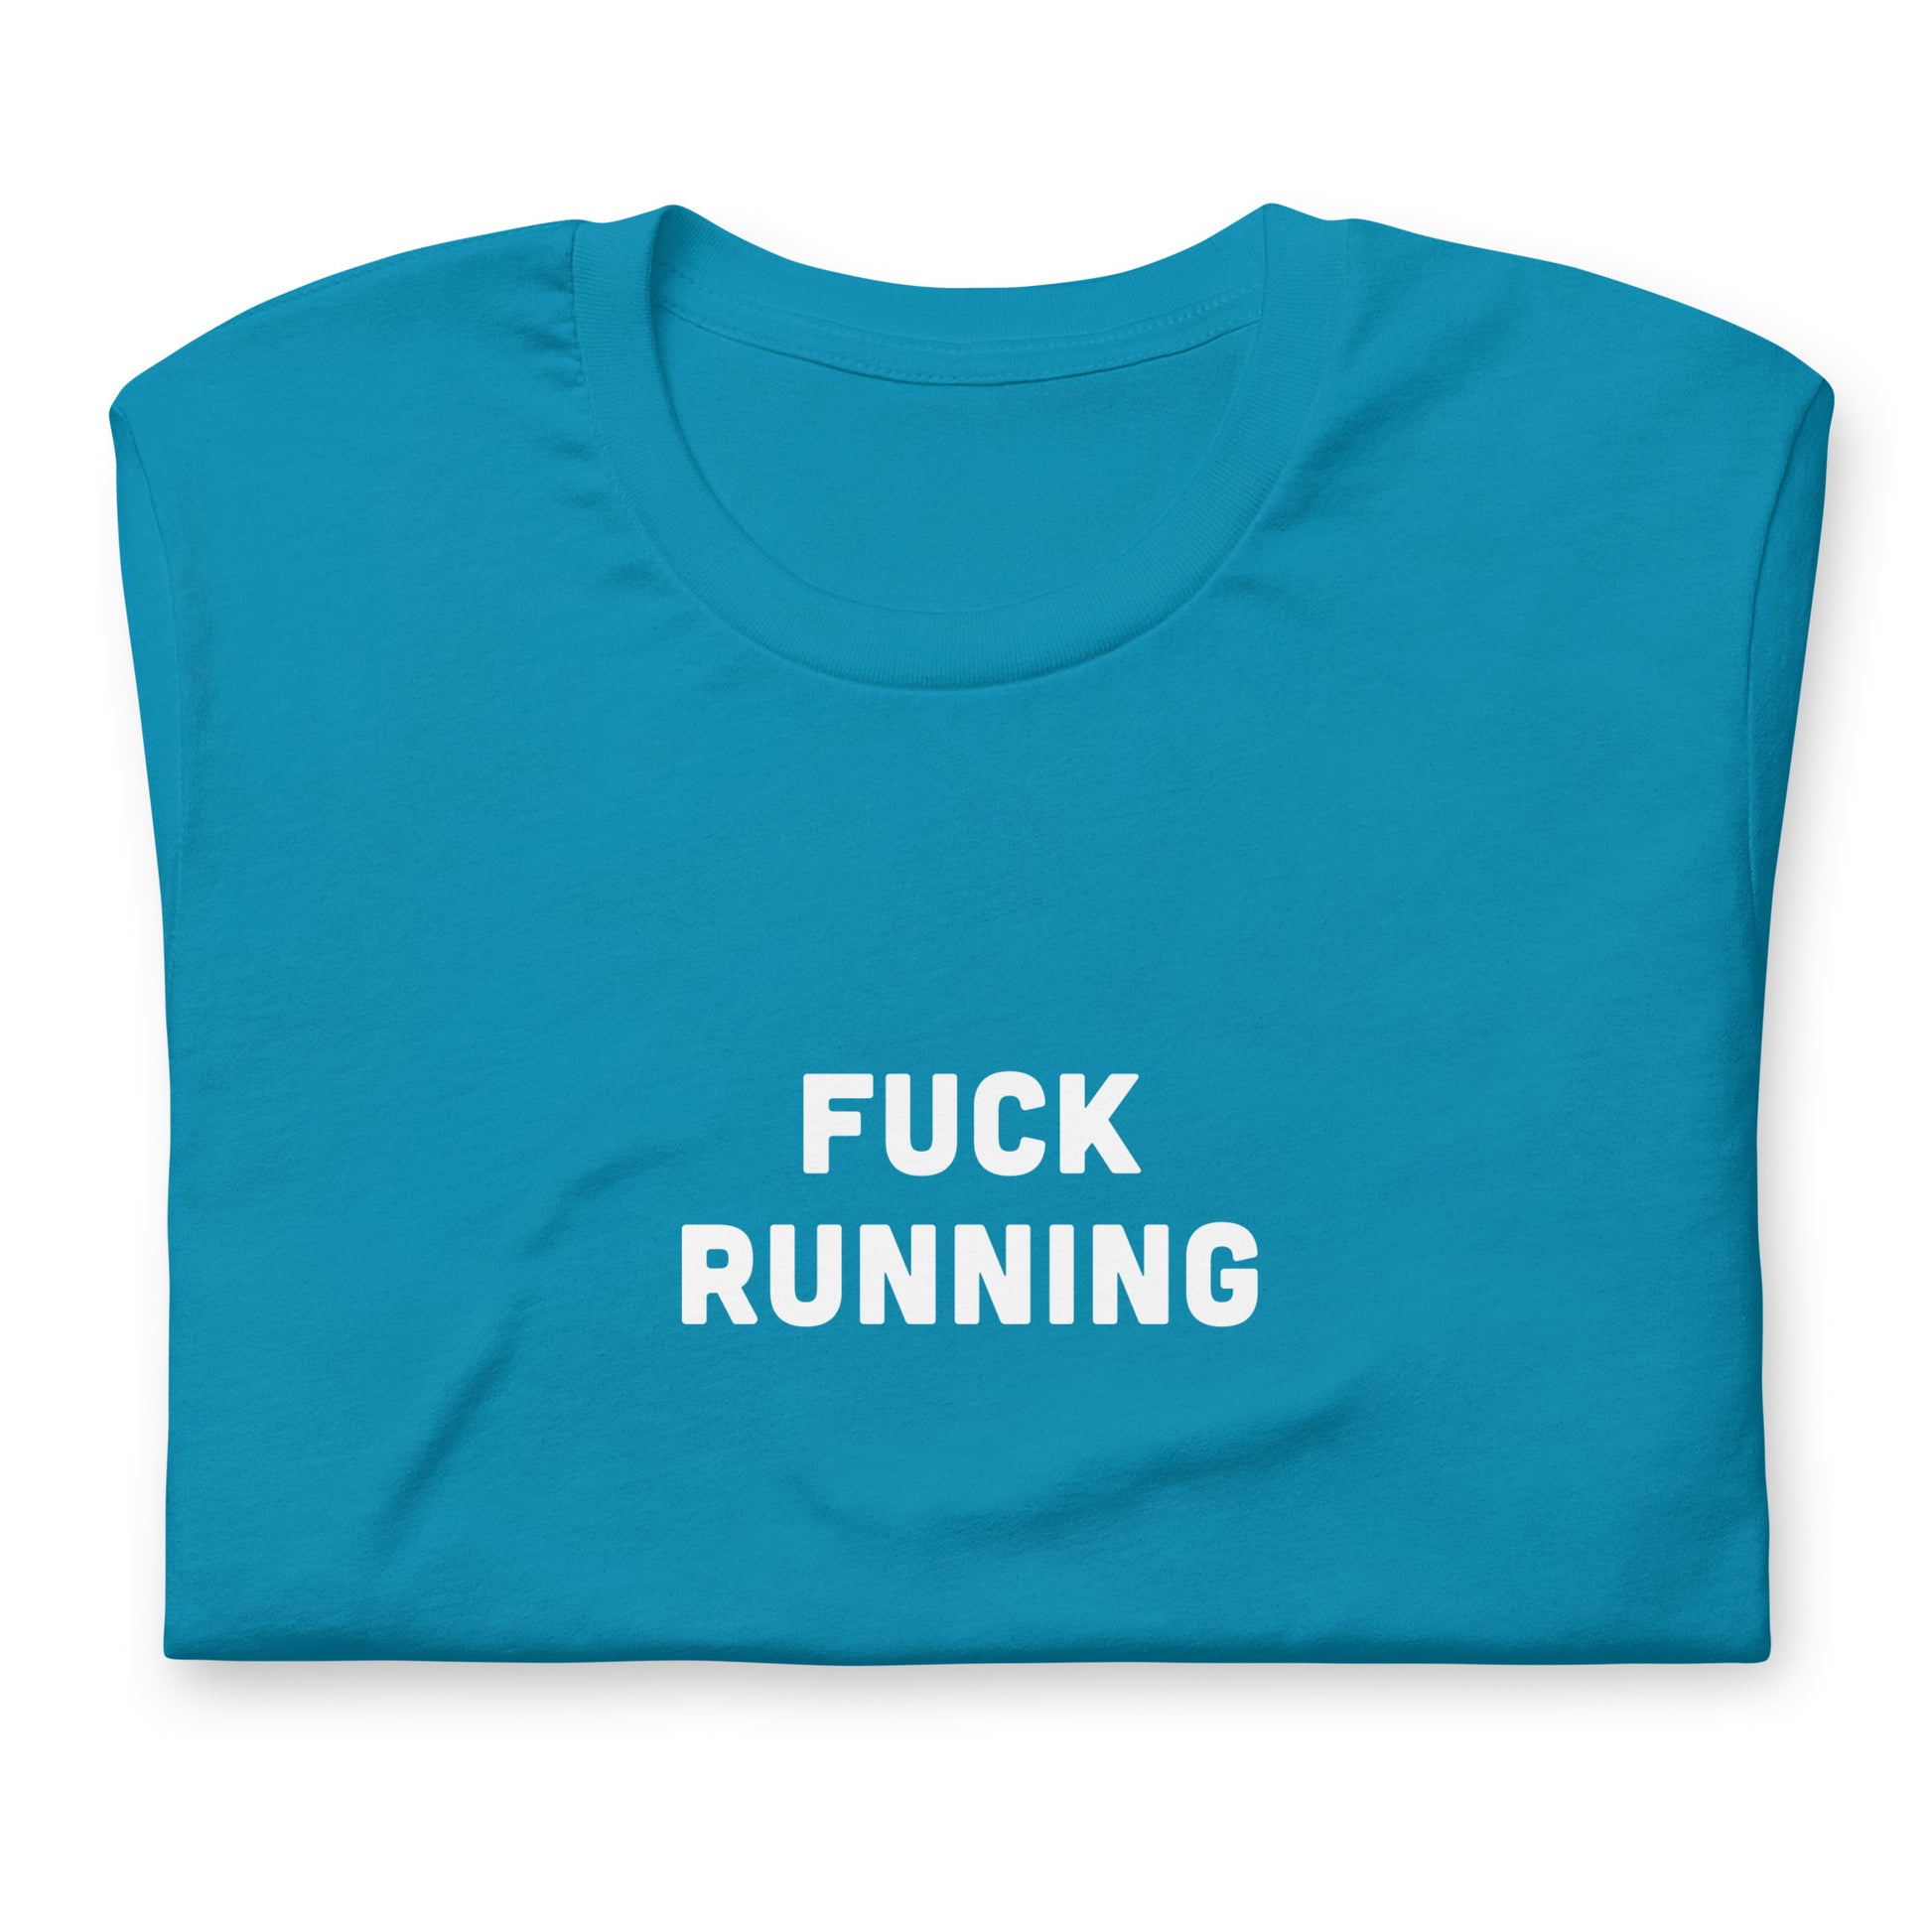 Fuck Running T-Shirt Size M Color Navy